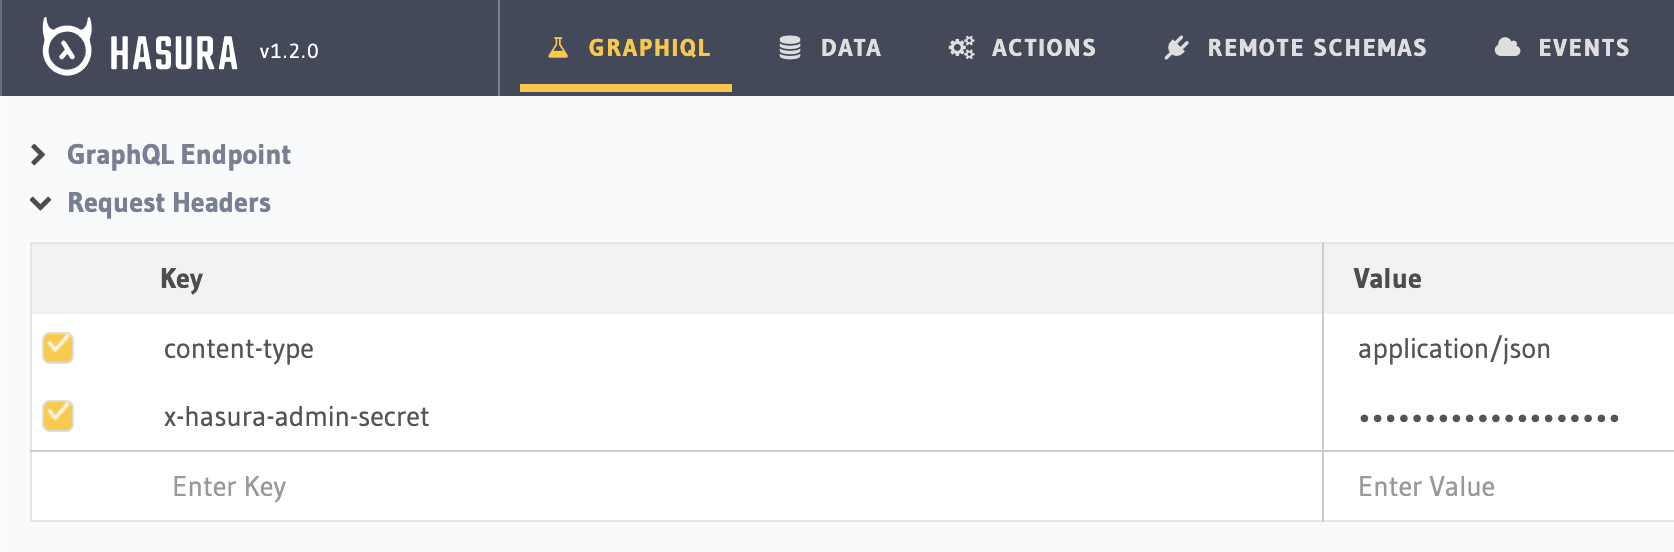 GraphiQL with added request header